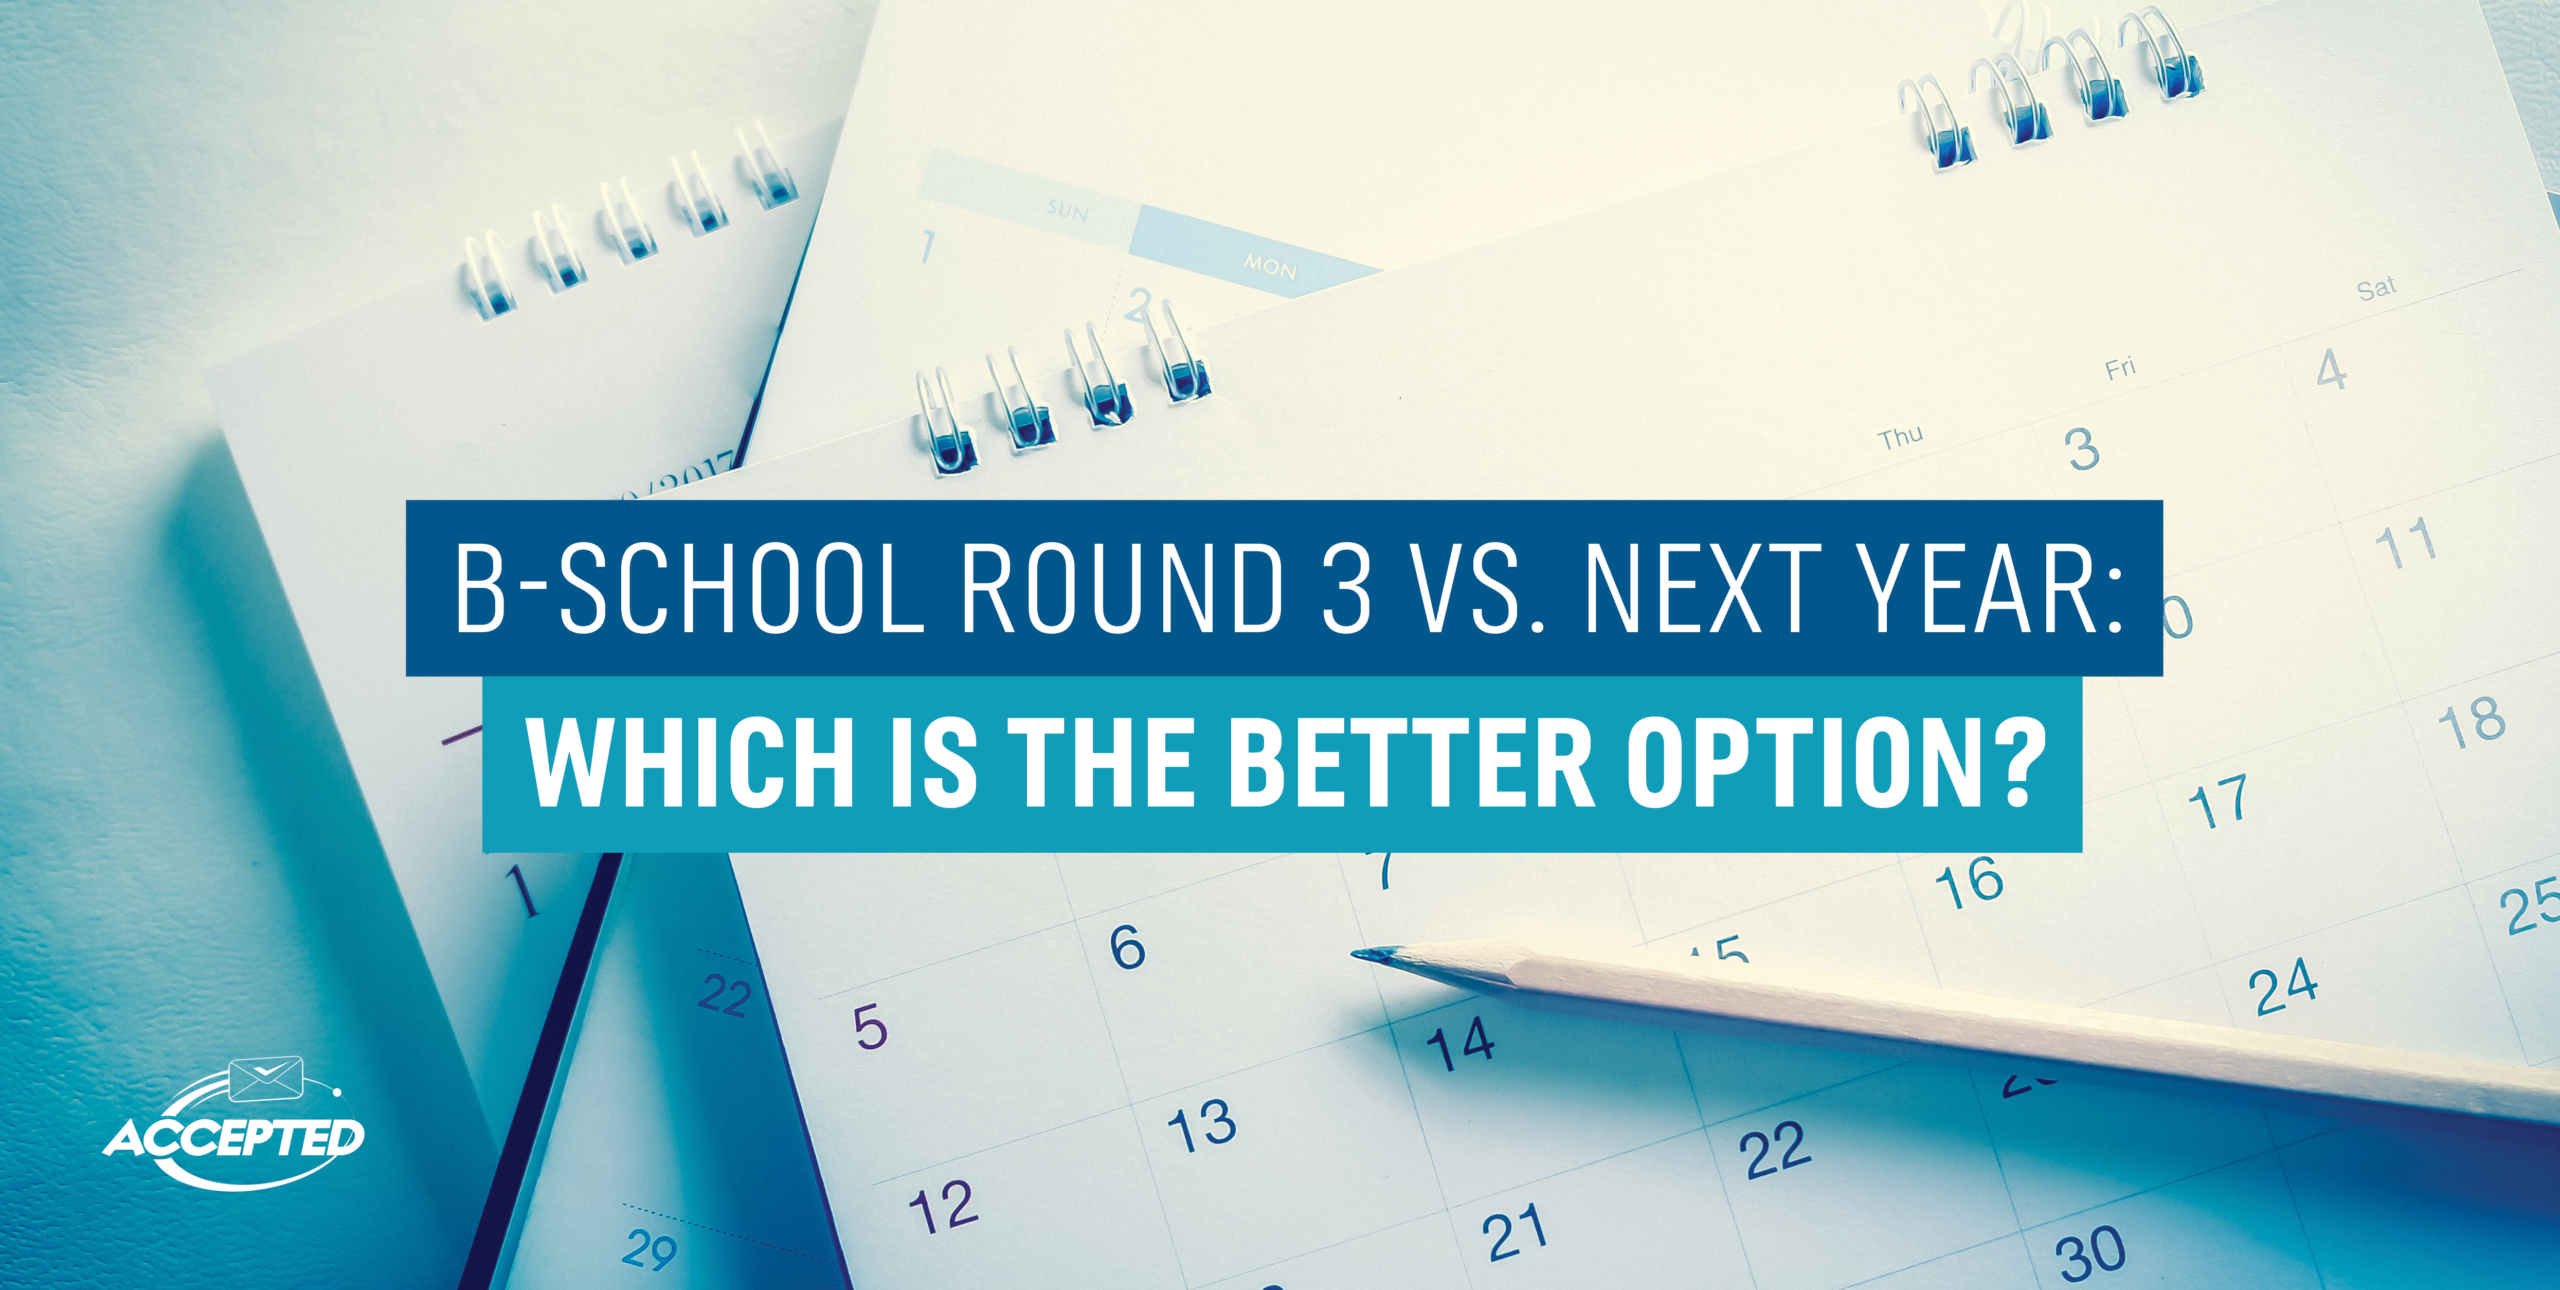 Permalink to: "B-School Round 3 vs. Next Year: Which Is The Better Option?"